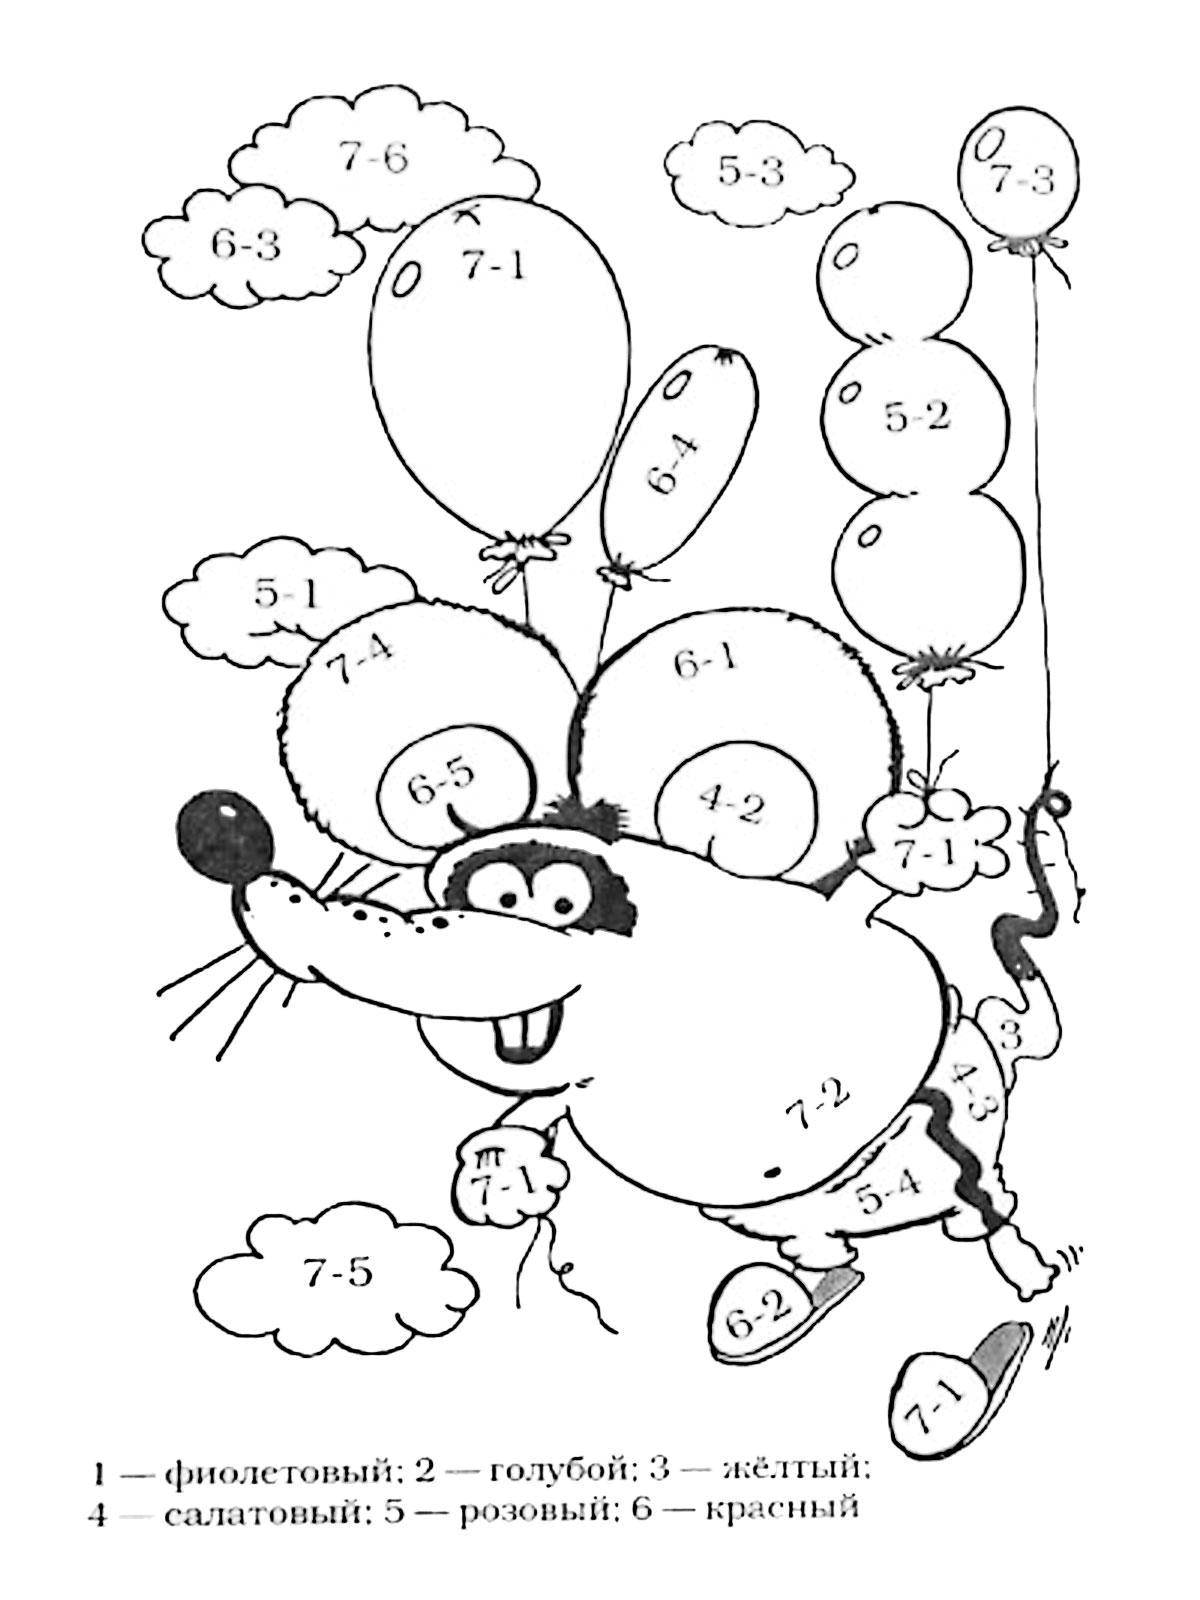 Coloring Paint a mouse solving examples. Category mathematical coloring pages. Tags:  examples, math, mouse beads, .